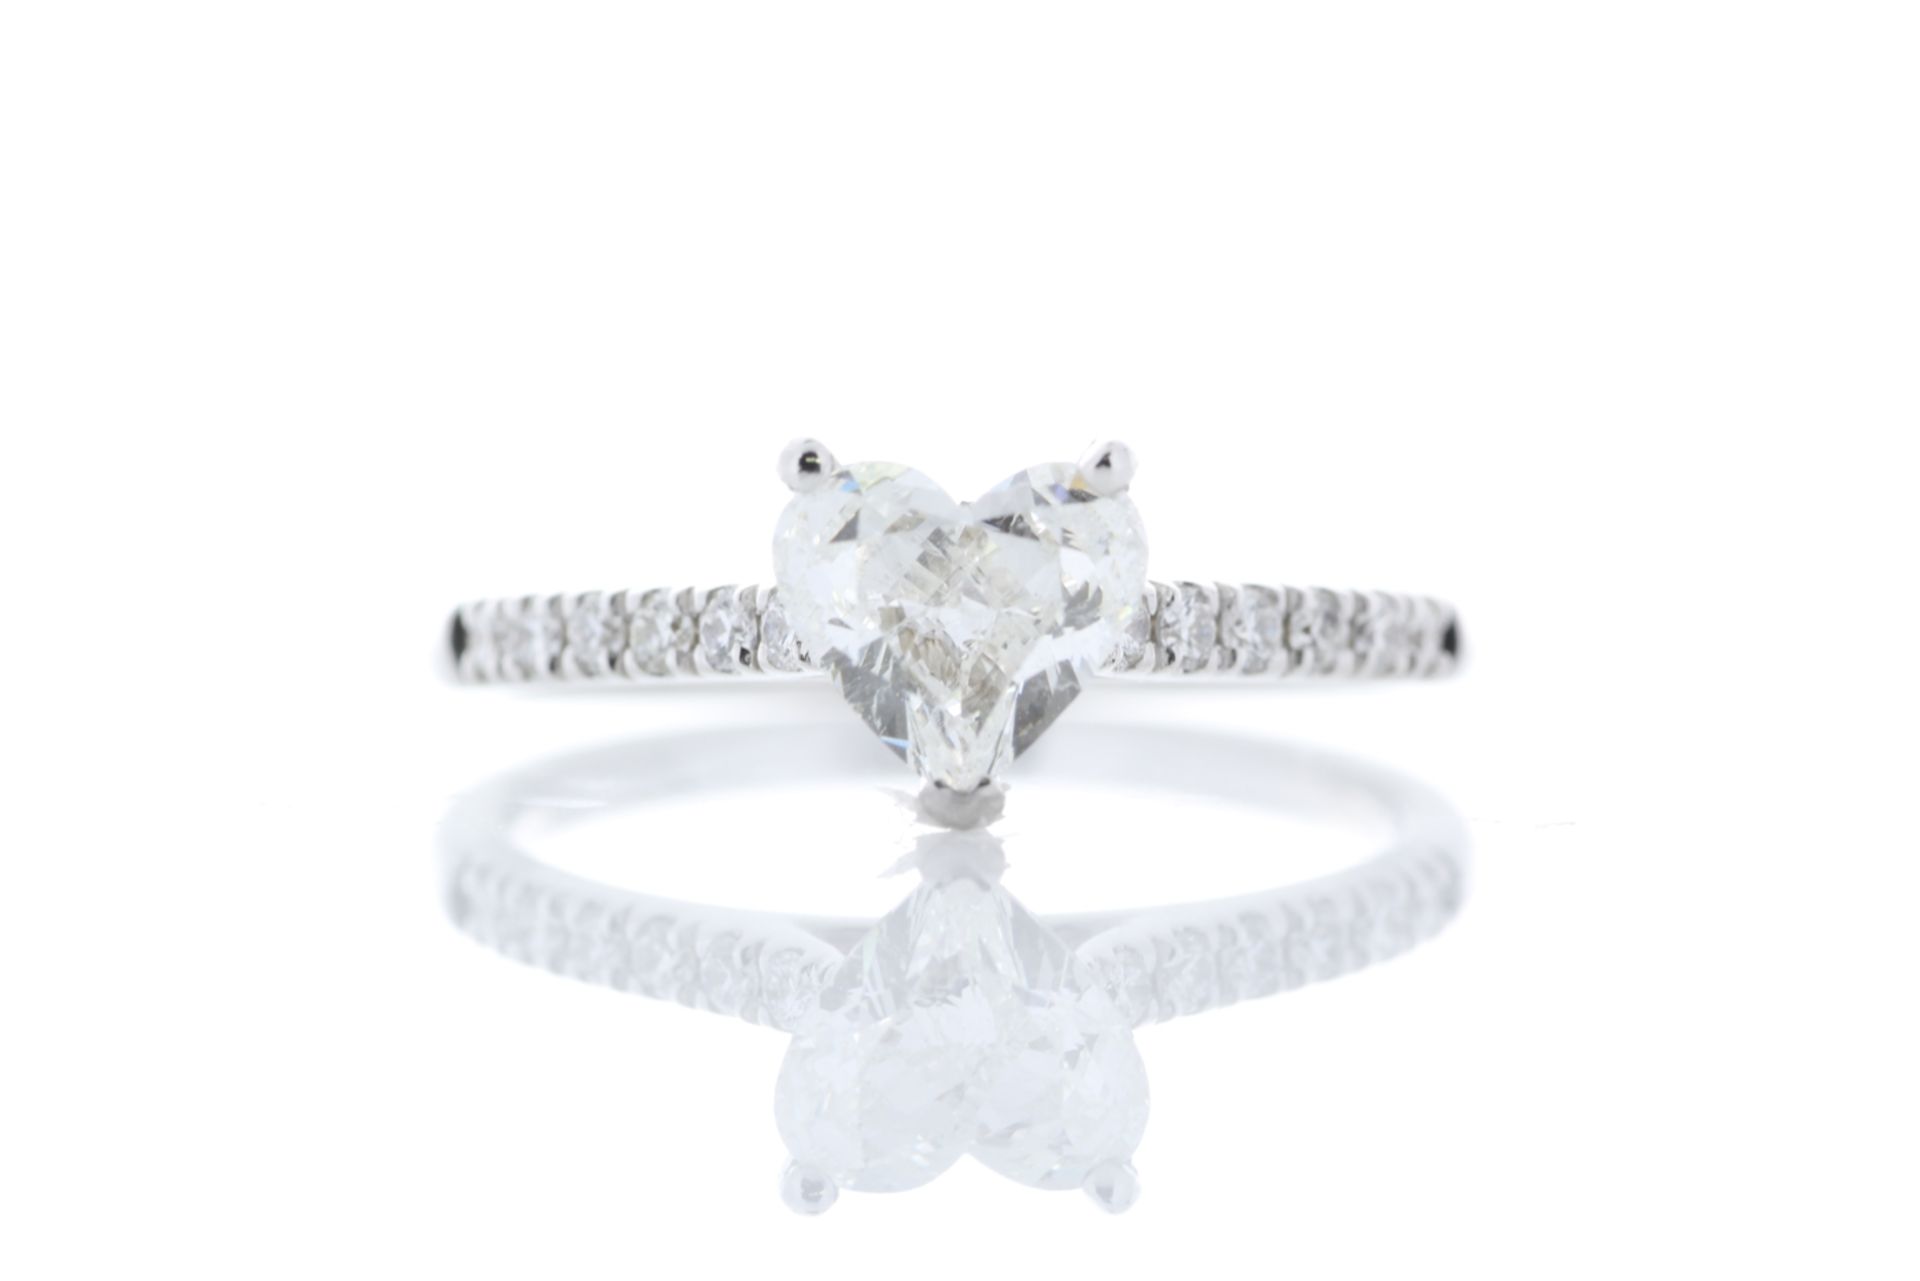 18ct White Gold Heart Shape Diamond Ring 1.17 Carats - Valued By GIE £38,680.00 - This lovely ring